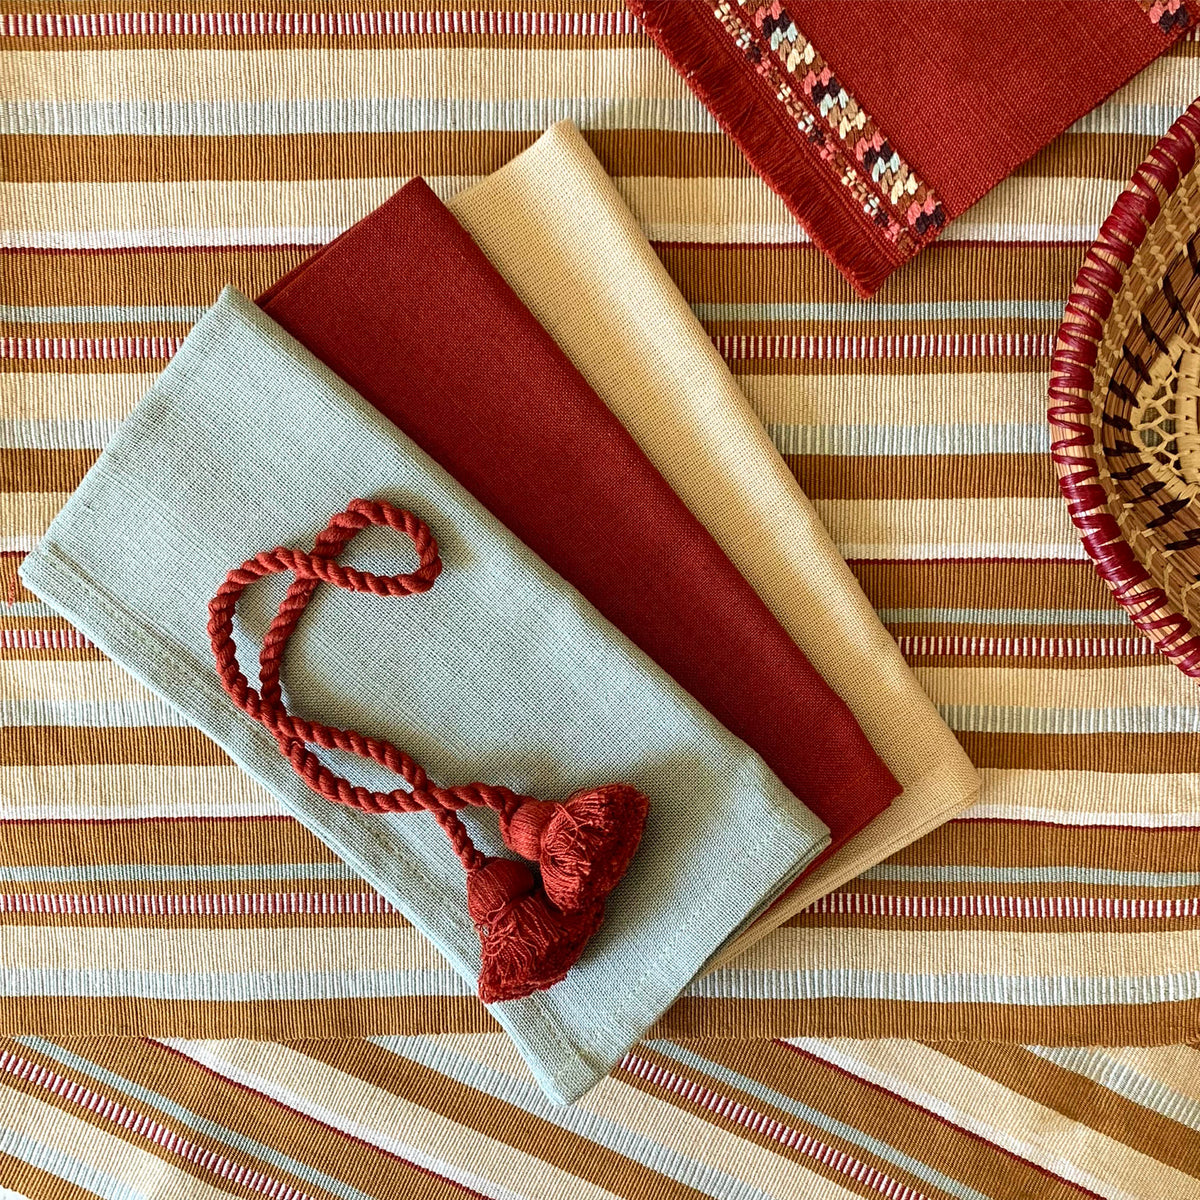 handwoven table runner with coordinating napkins